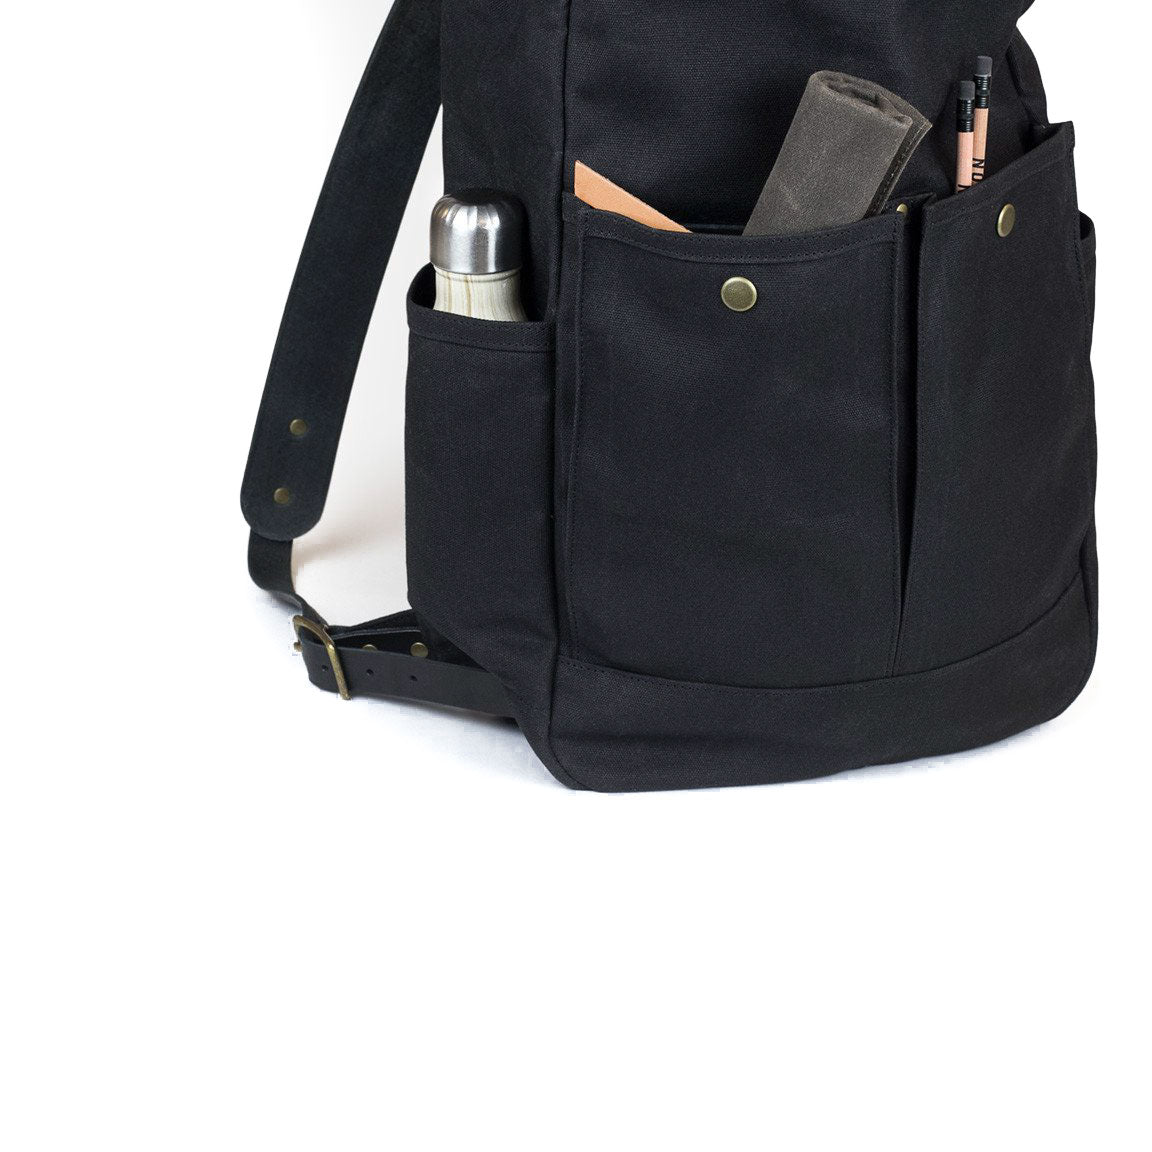 Roll Top Backpack Black Waxed Canvas & Black Leather